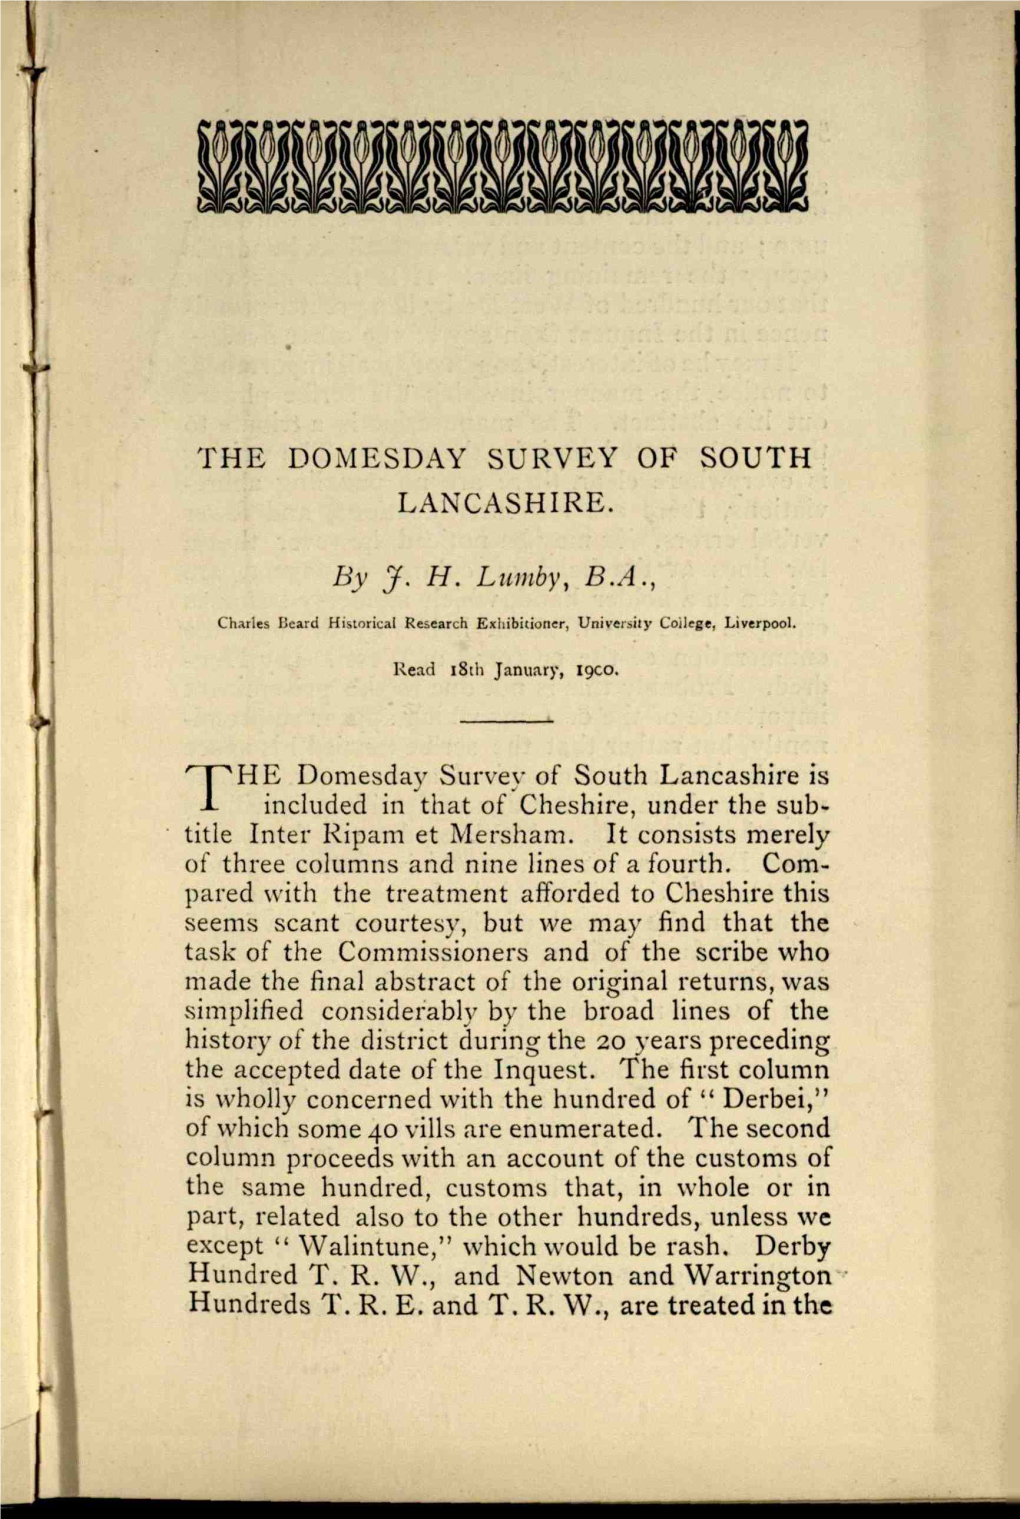 The Domesday Survey of South Lancashire